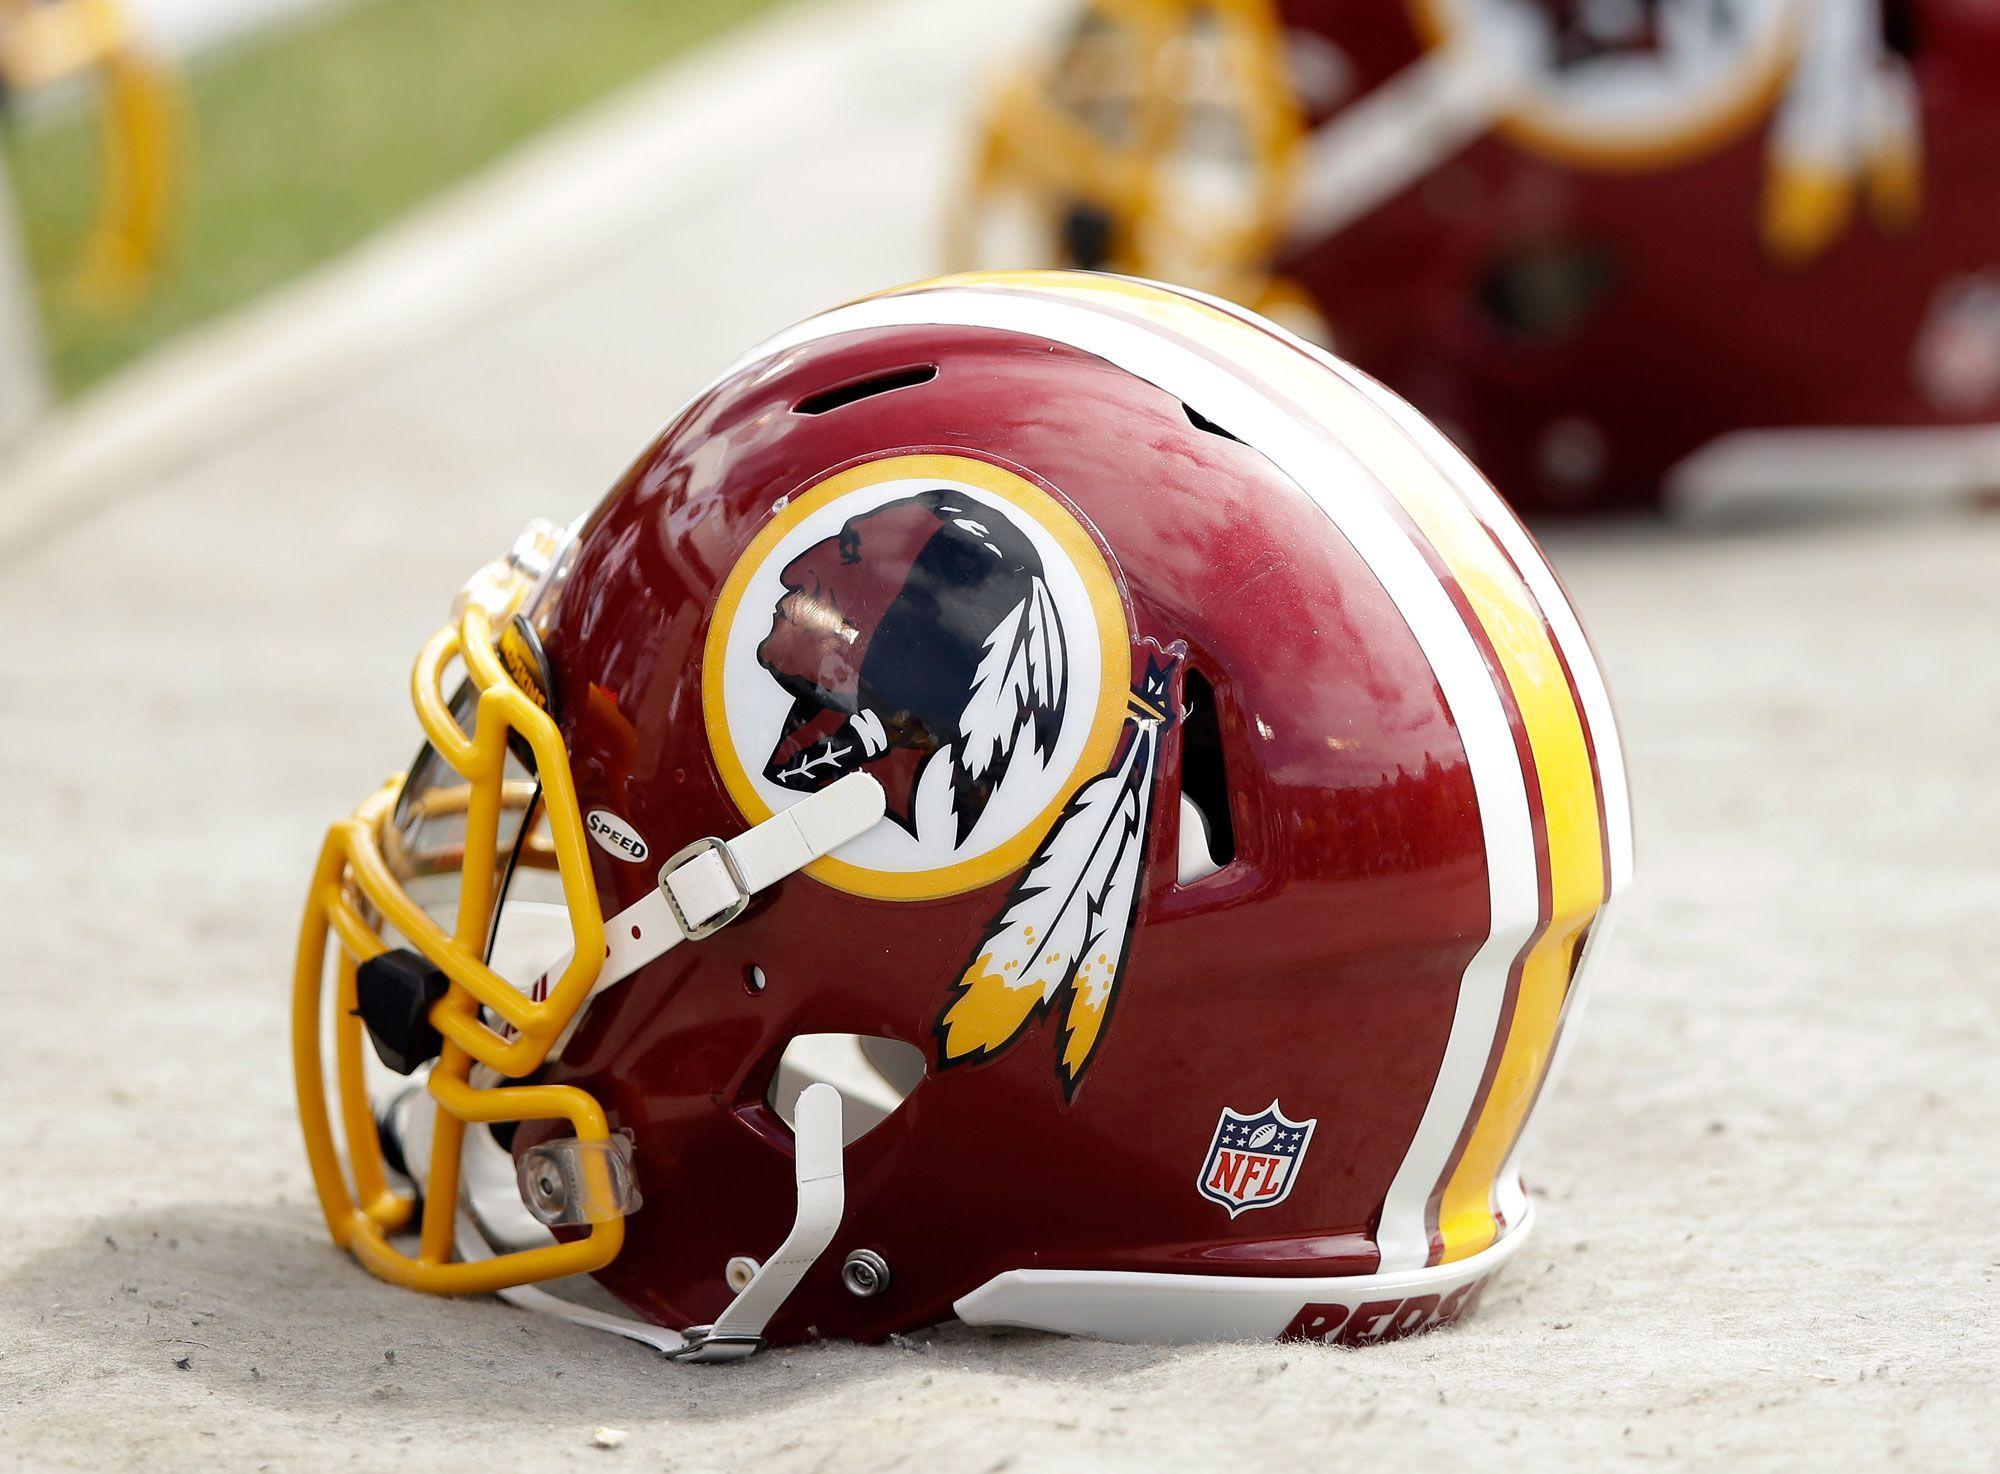 Here's a great new name for the Washington Redskins